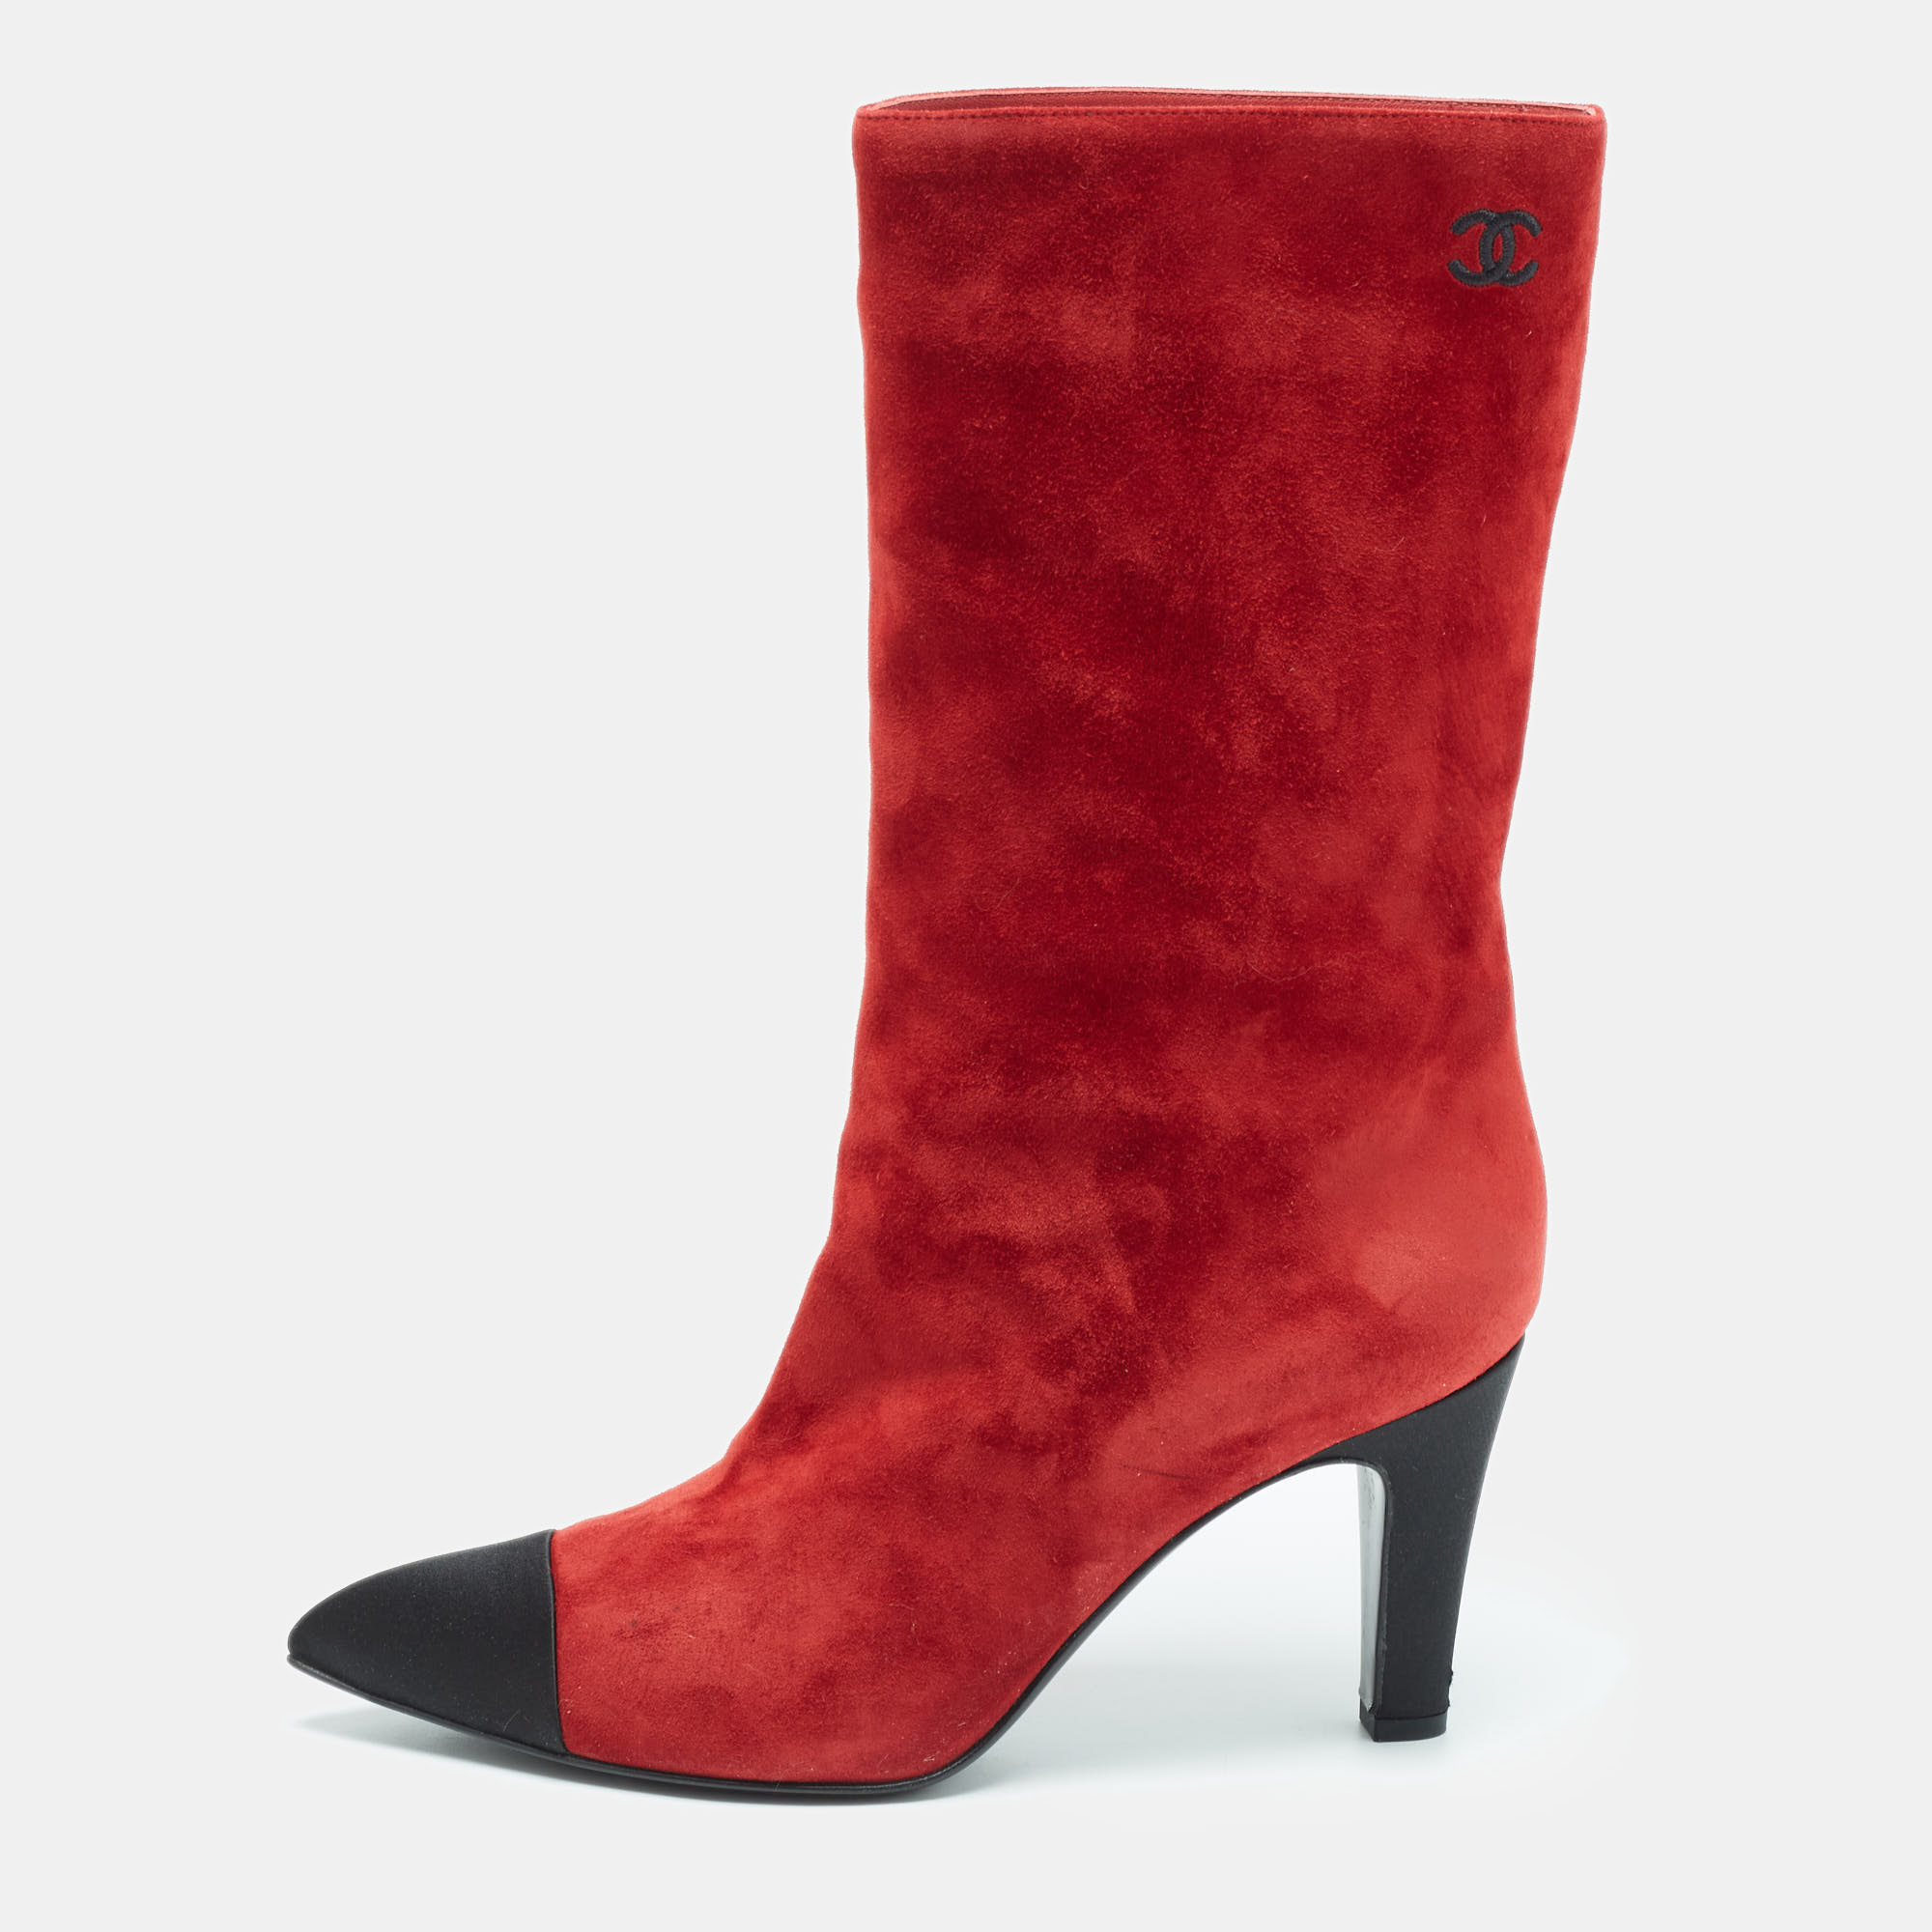 Chanel Red/Black Suede Pointed Toe Mid Calf Boots Size 40